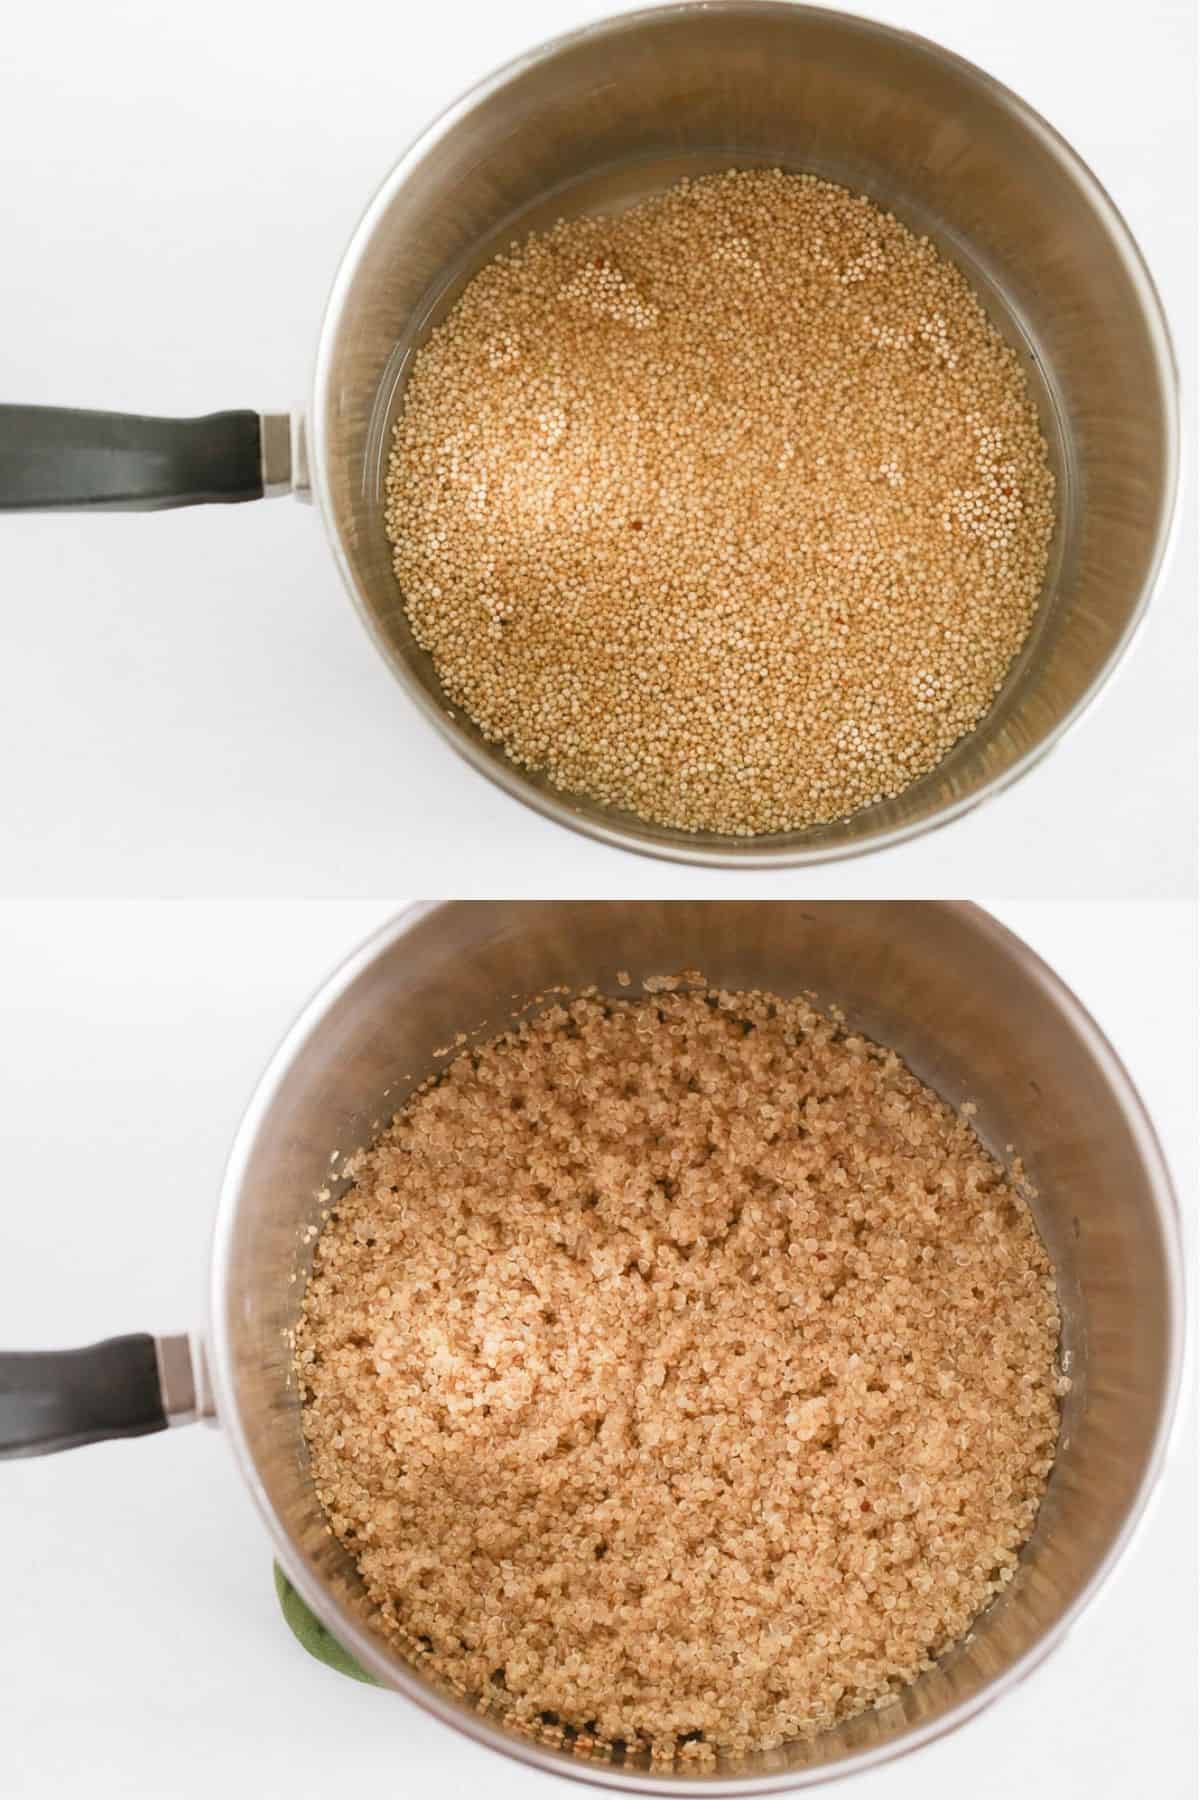 The quinoa in a saucepan before cooking and after cooking.